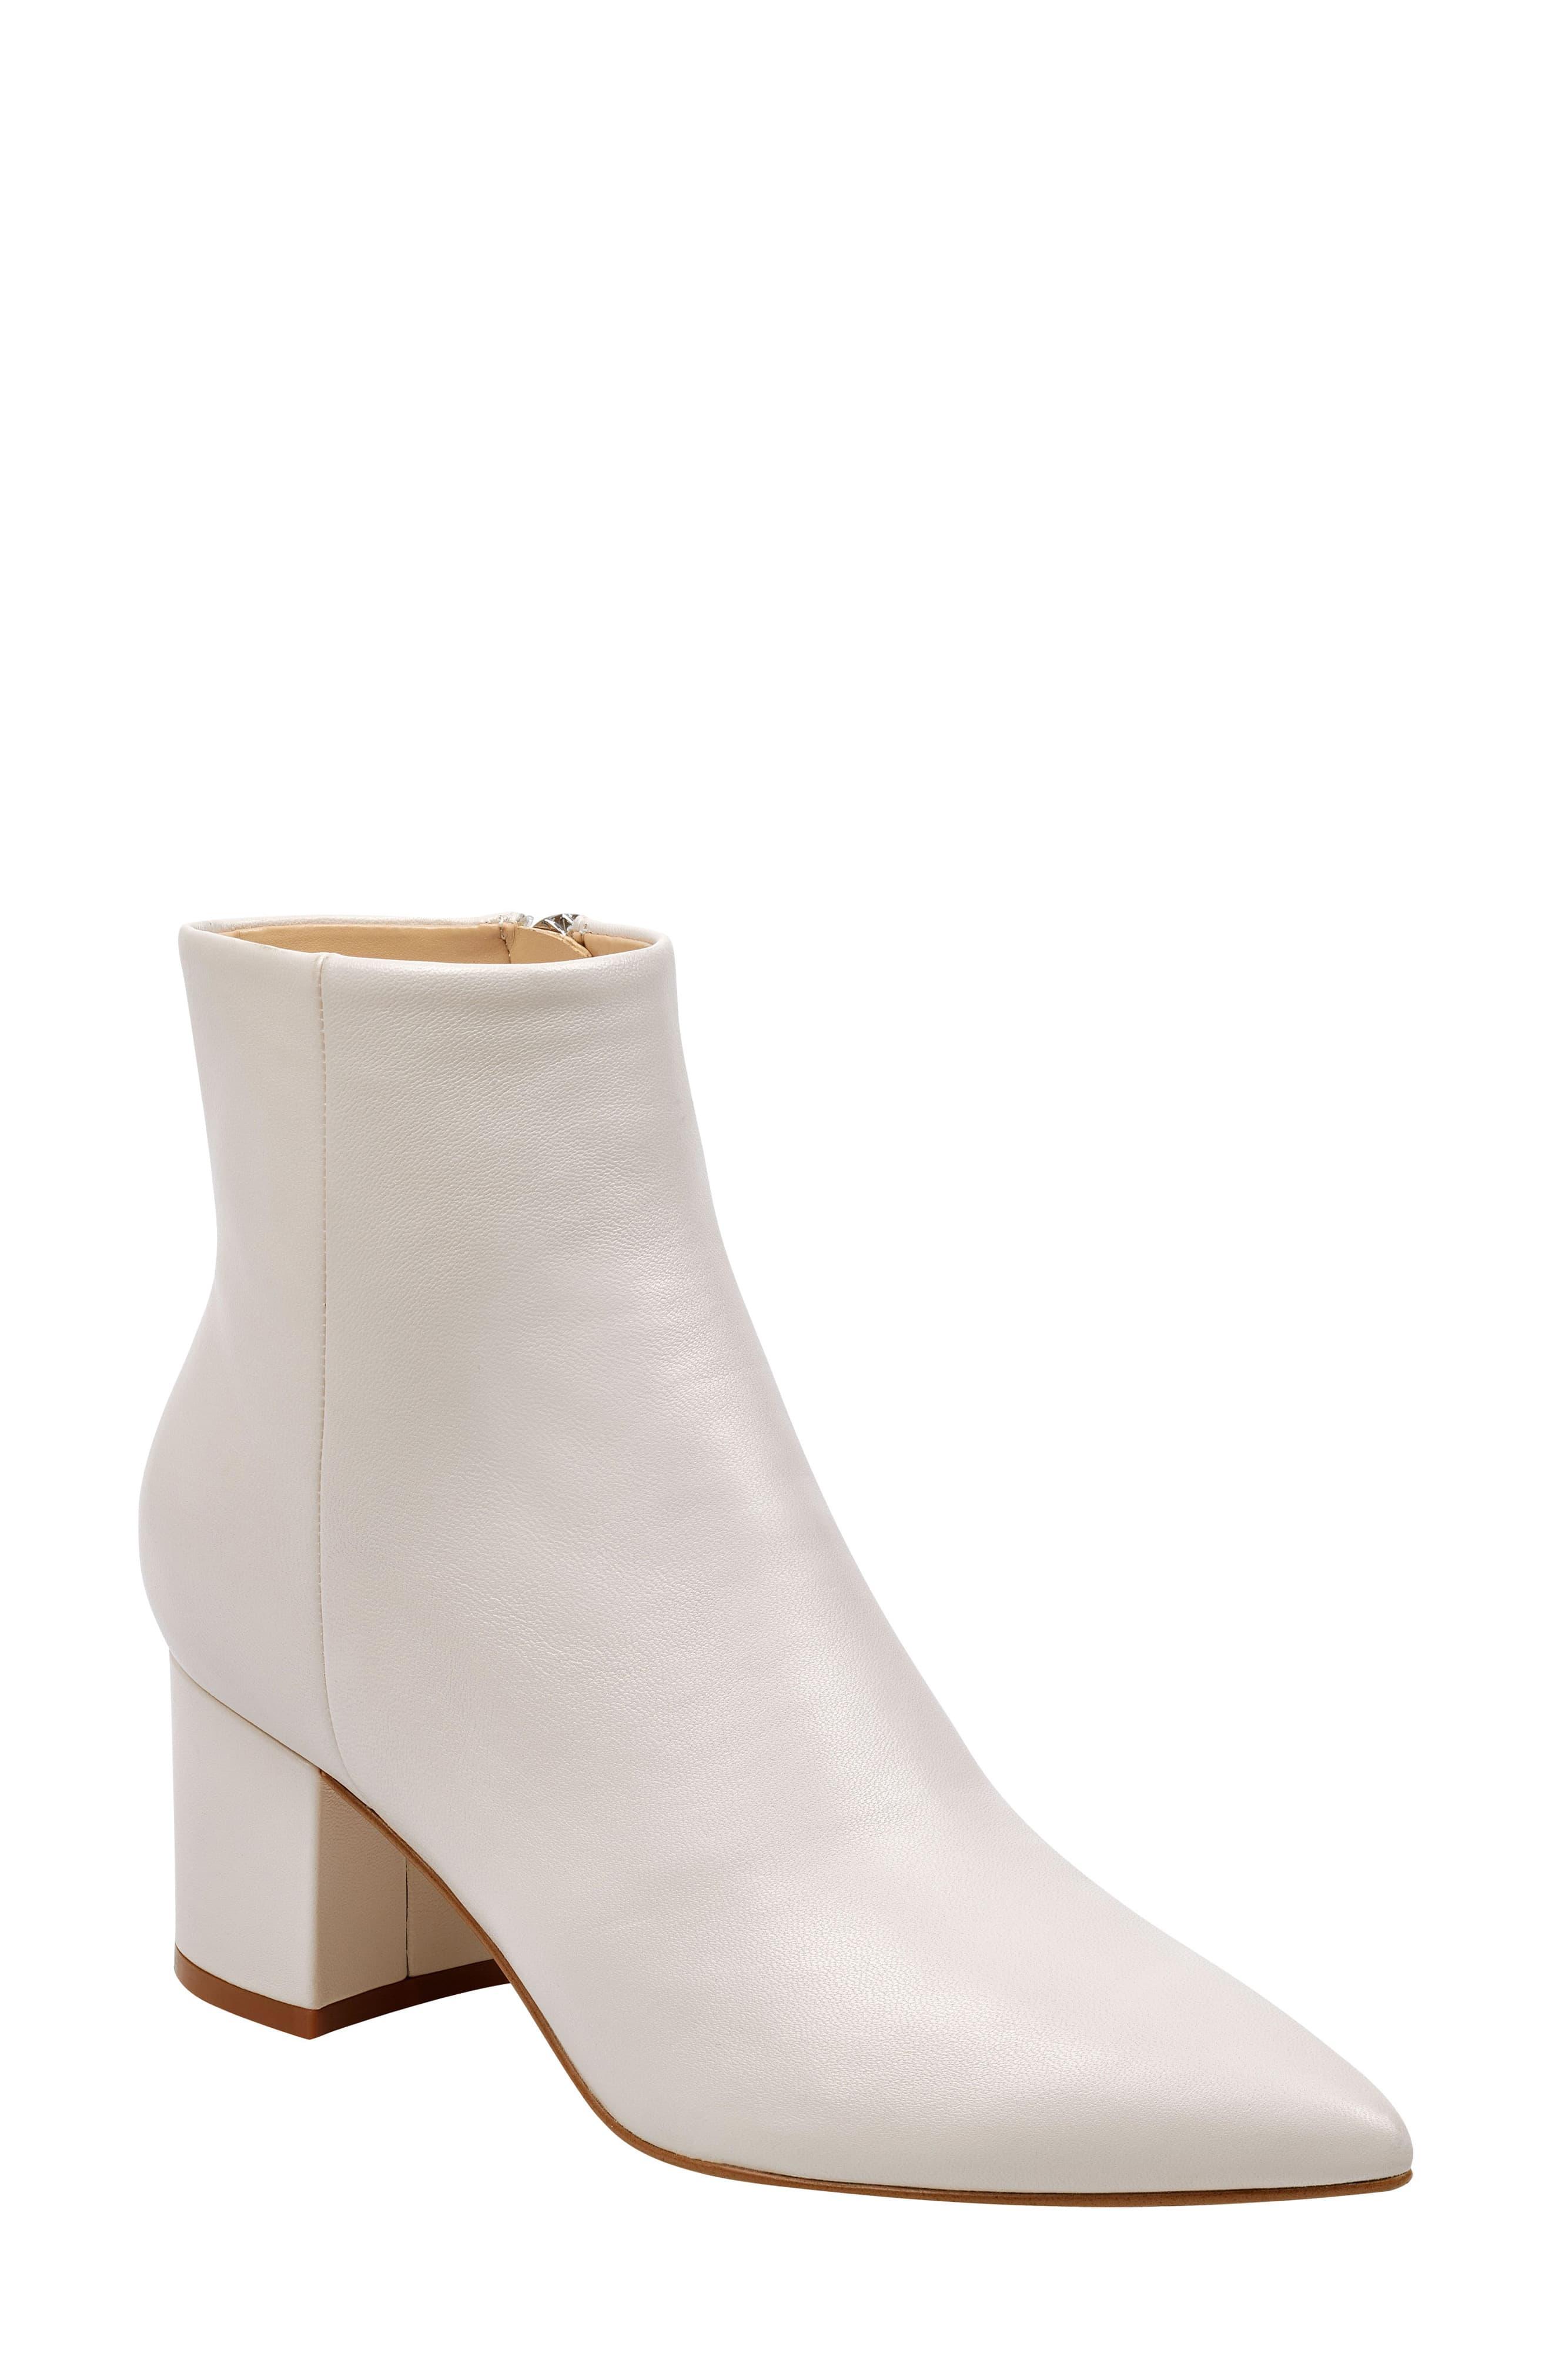 Marc Fisher Jarli Bootie in Ivory Leather (White) - Lyst